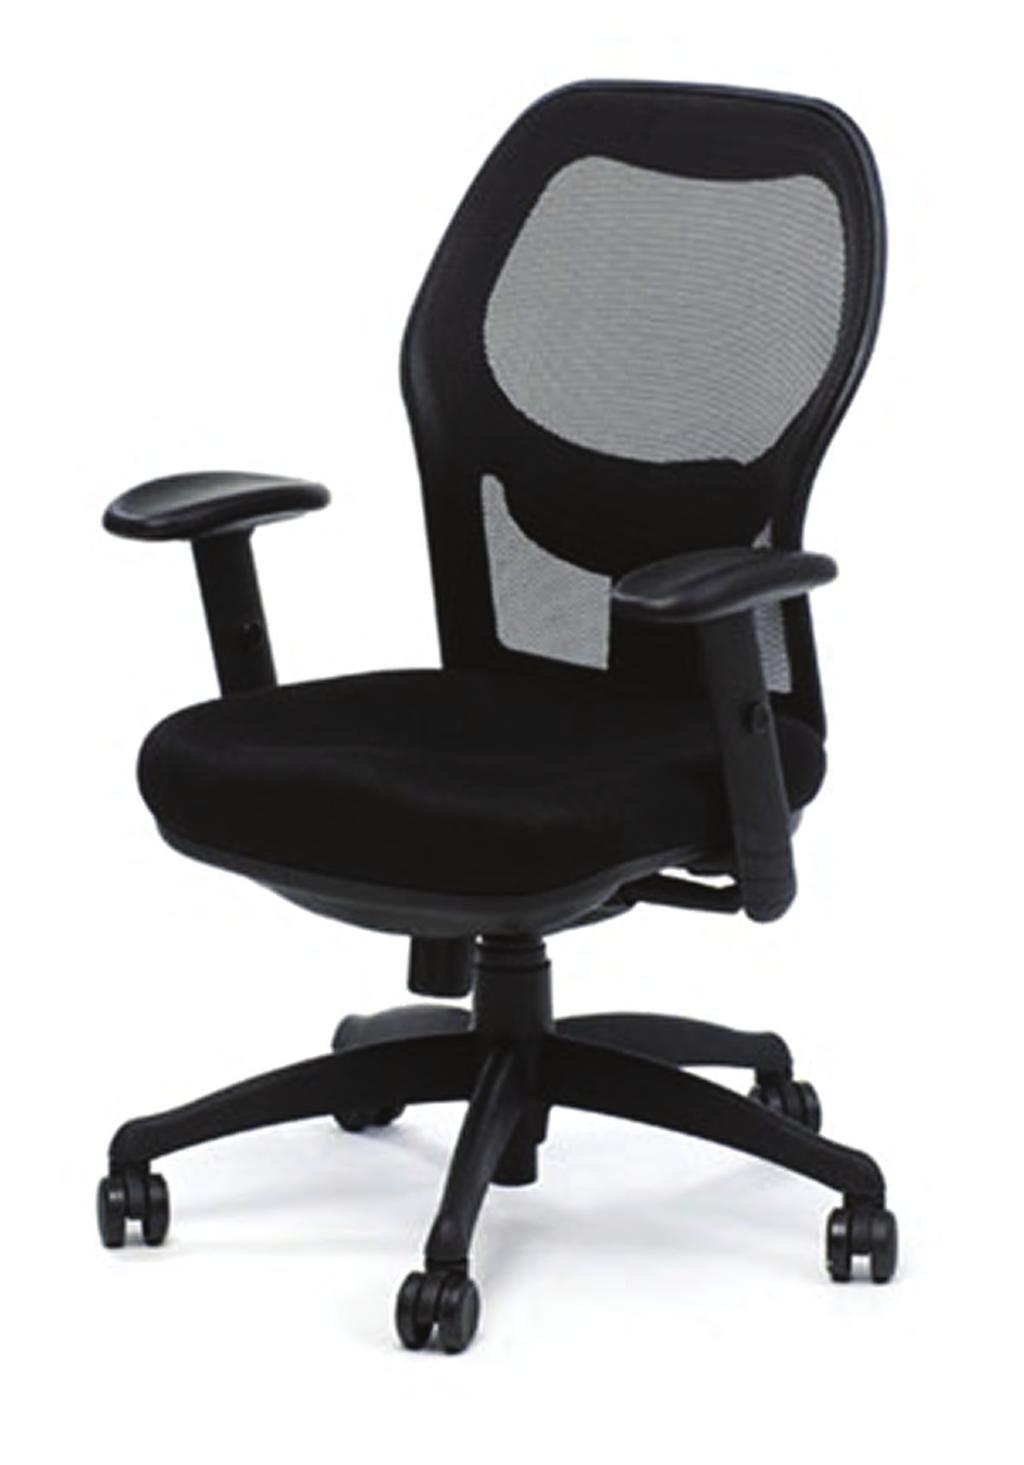 PC Mesh F54PCMSBLK Seat is made with high-density foam Waterfall-style seat Steel reinforced seat assembly Adjustable tilt Breathable mesh back Adjustable lumbar support Adjustable arms